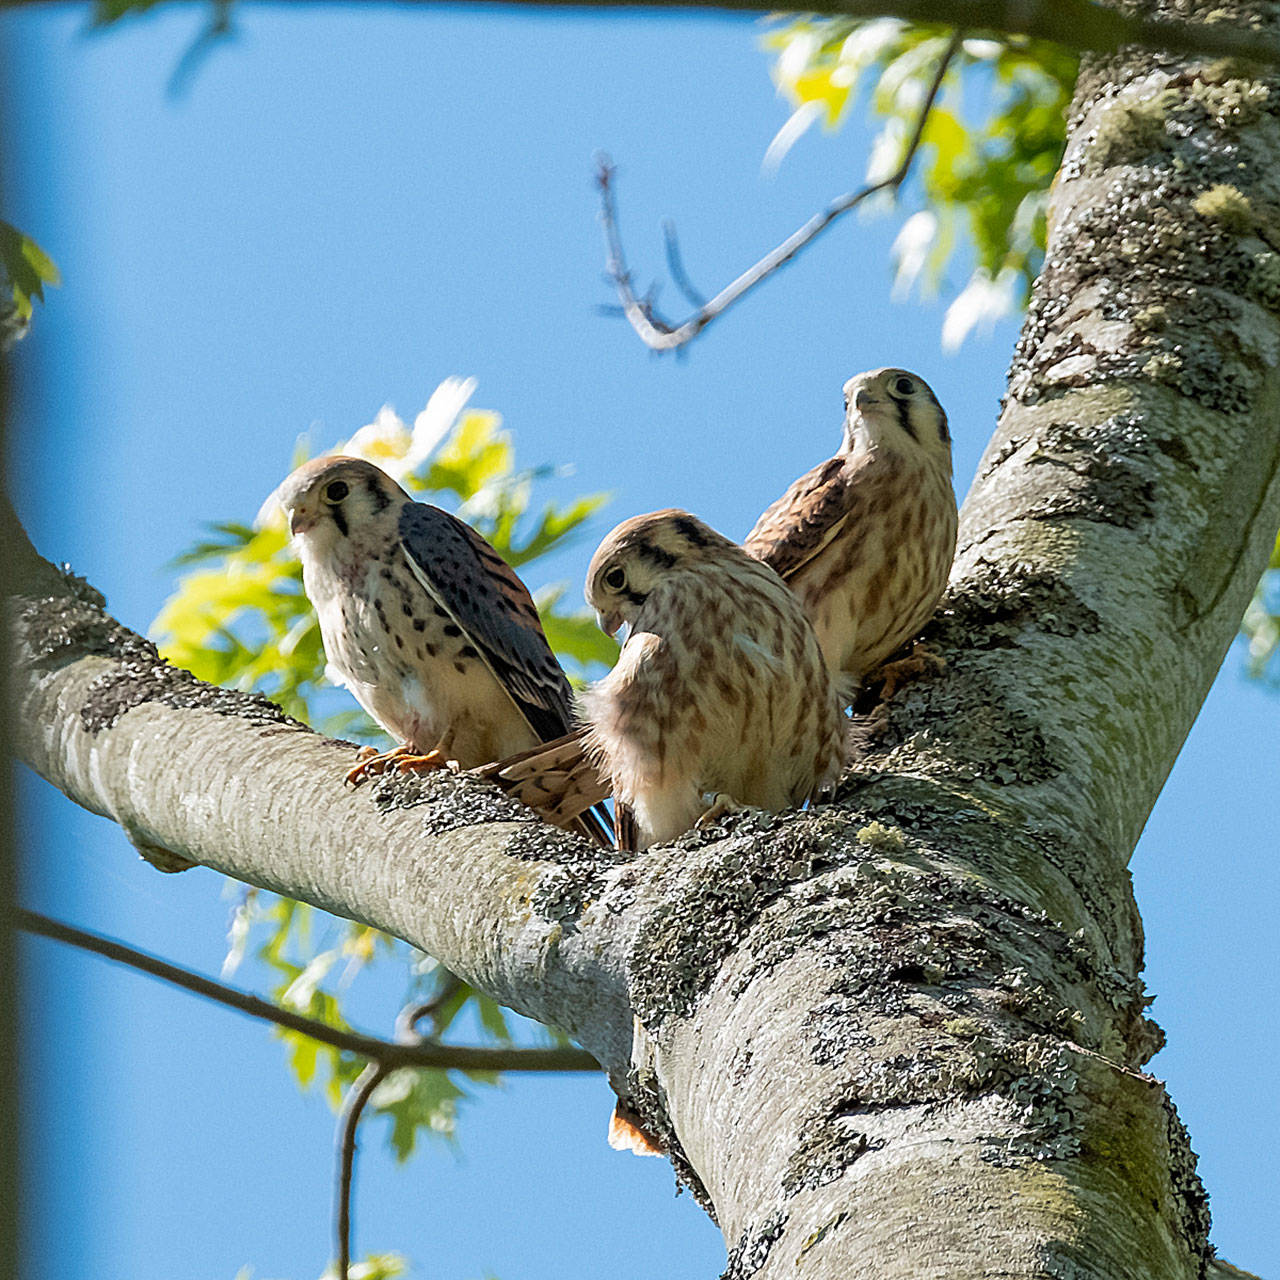 American kestrels, shown here, are among the raptors that Sue Cottrell will discuss at her upcoming talk as part of the Outdoor Speaker series in Marysville. (Sue Cottrell)